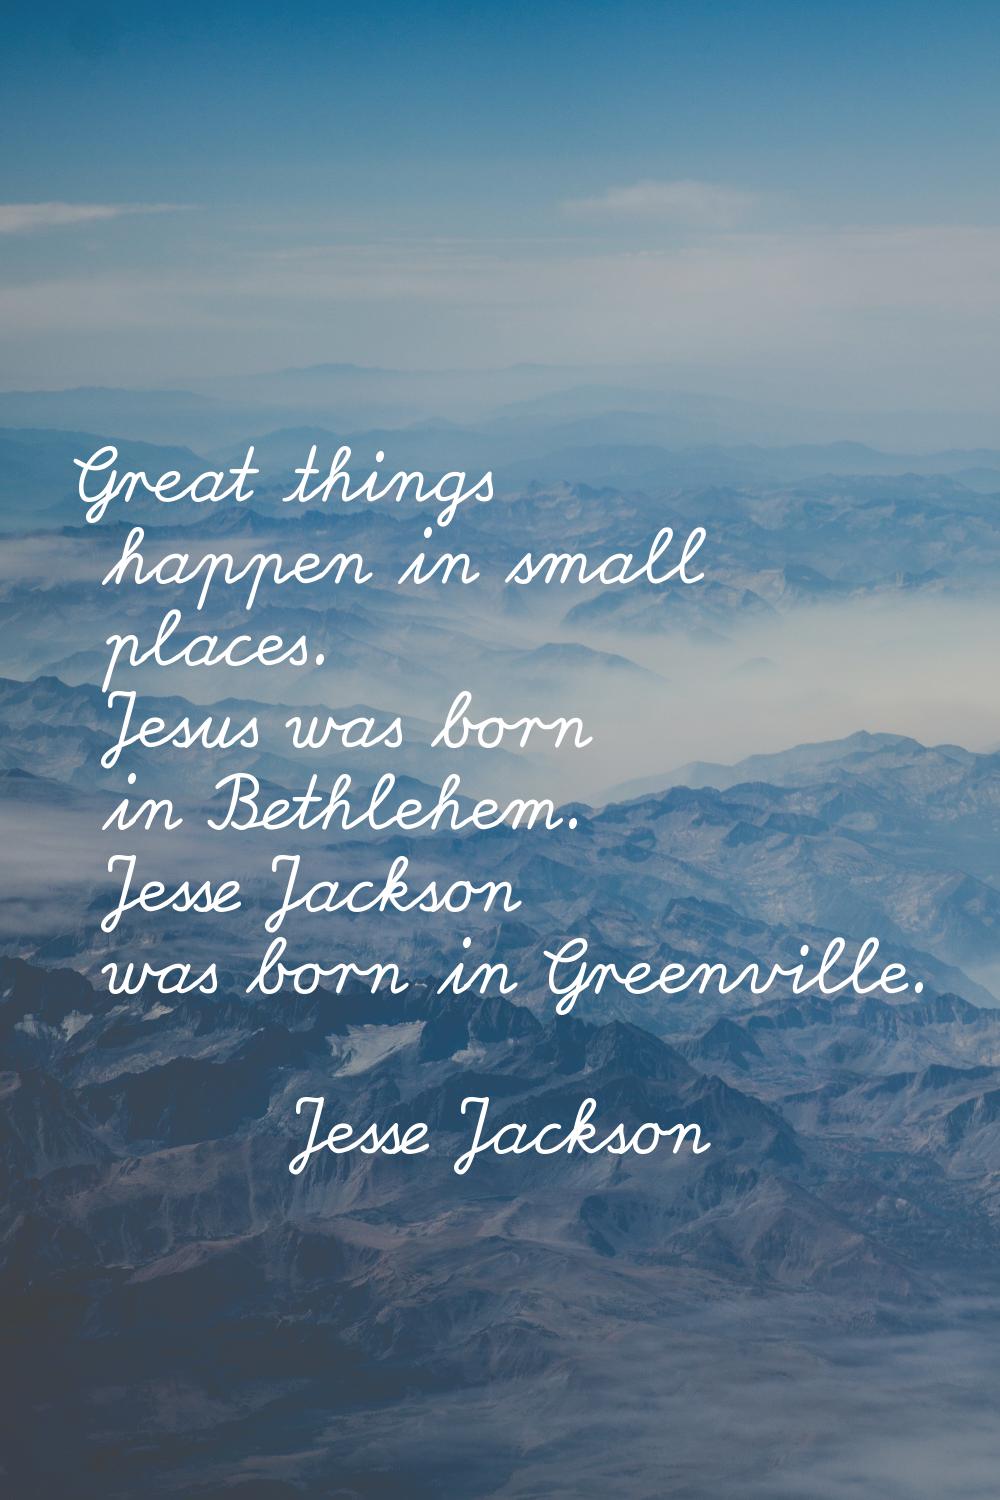 Great things happen in small places. Jesus was born in Bethlehem. Jesse Jackson was born in Greenvi